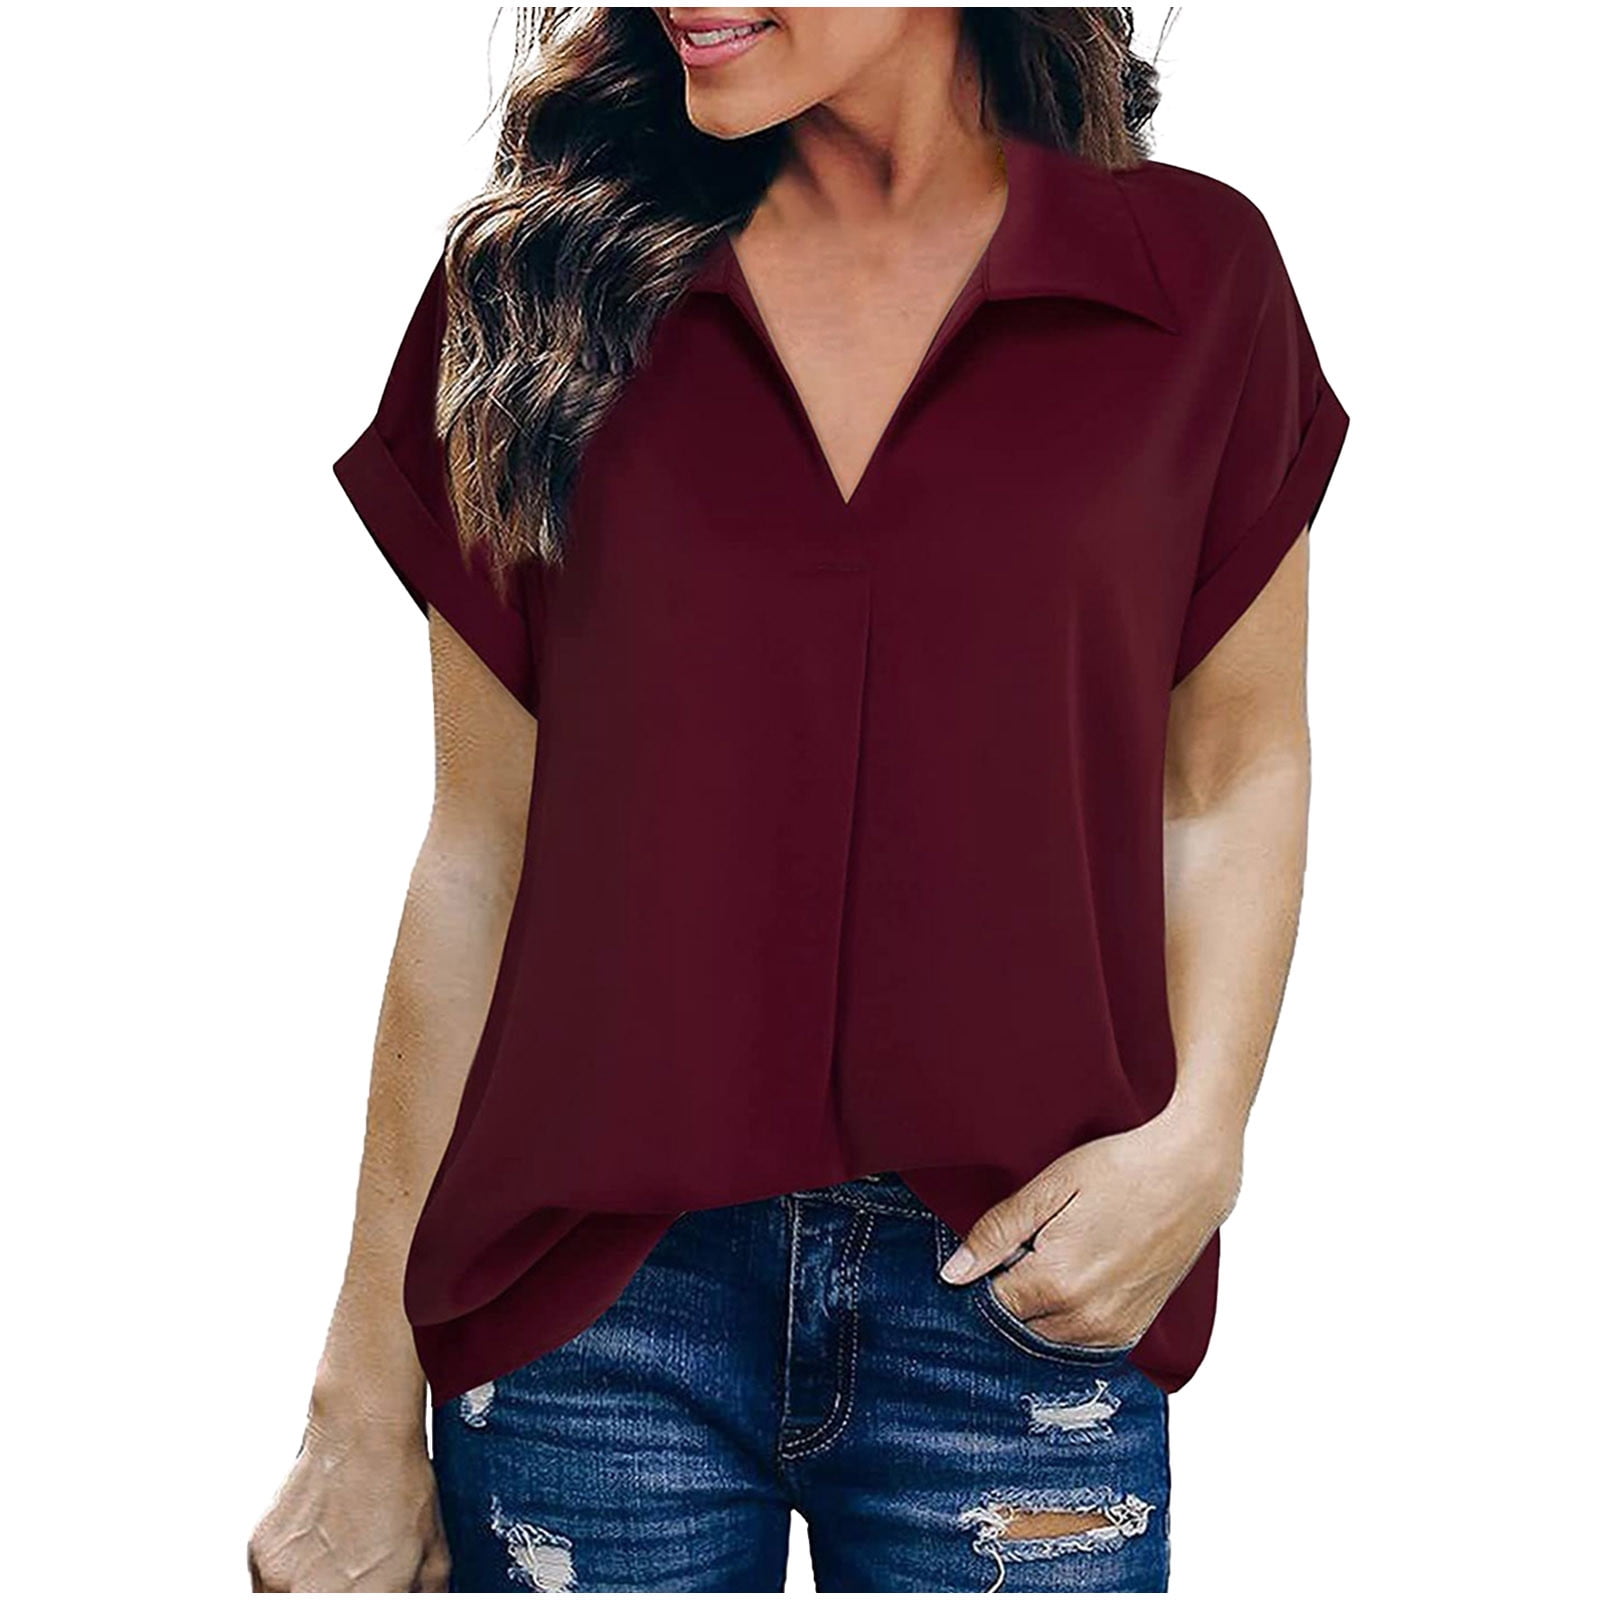 Dressy Tops for Women Business Casual Vintage Plain Color Short Sleeve  Shirts Summer Fashion Thin Lapel V Neck T-Shirts 